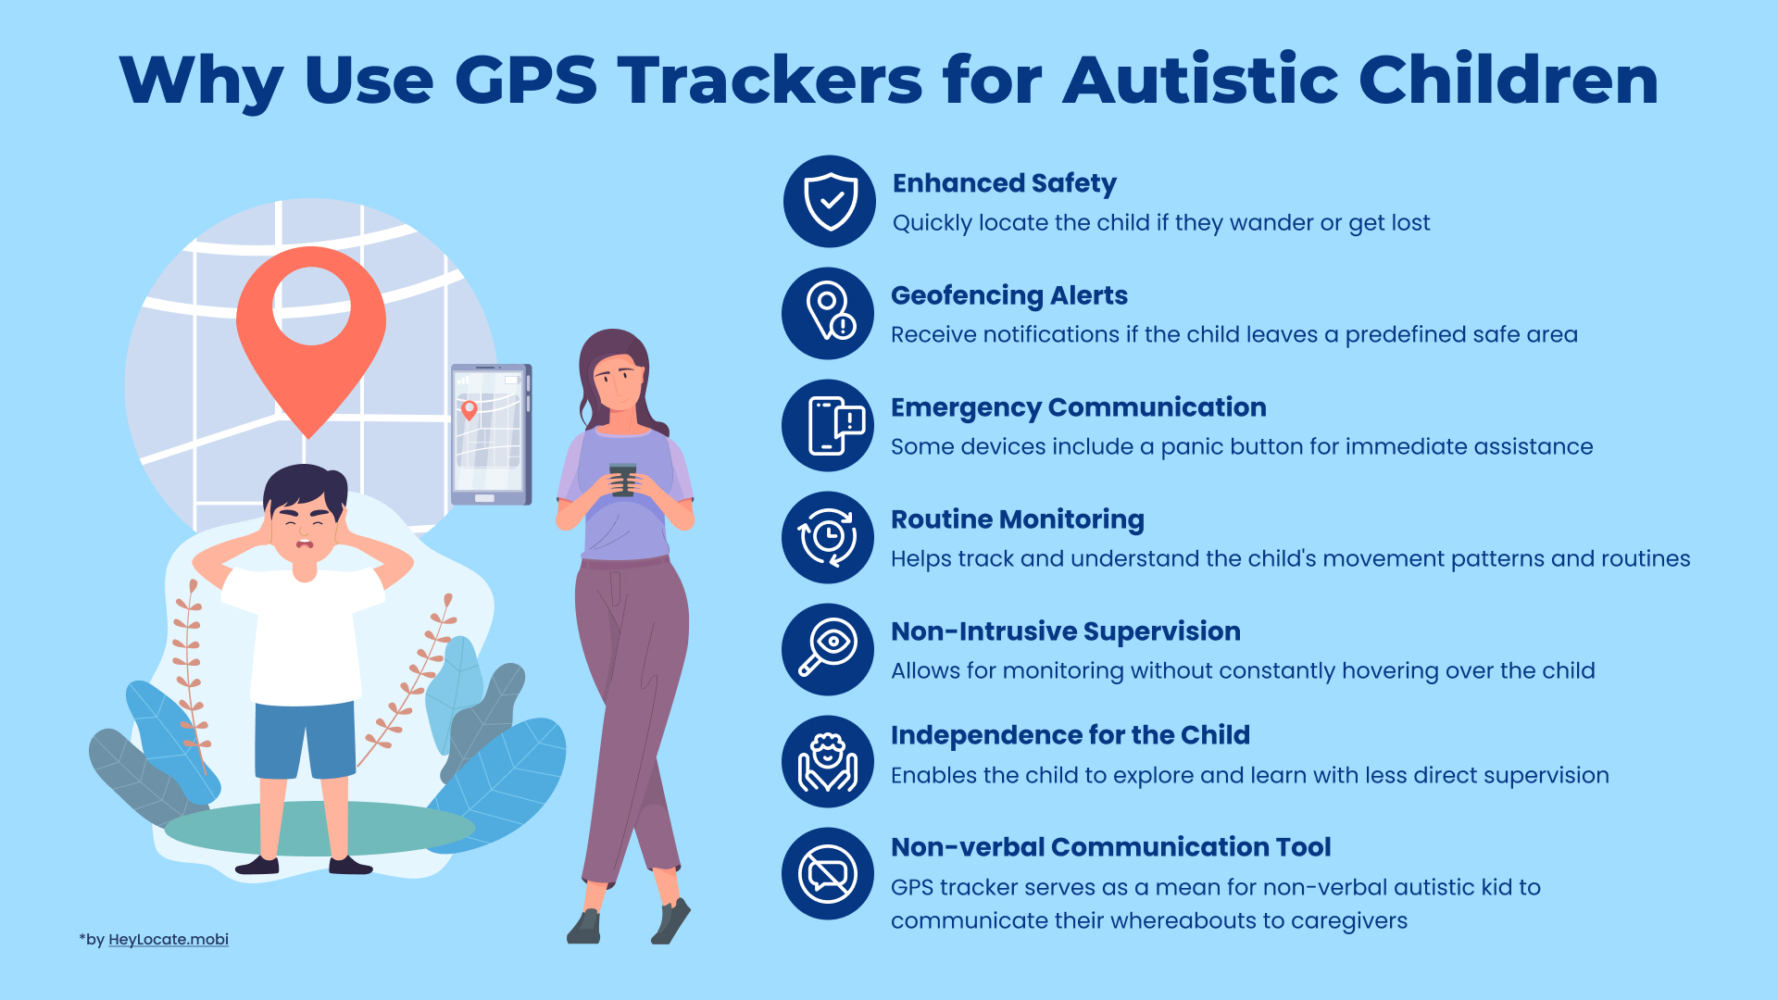 List of reasons Why Use GPS Trackers for Autistic Children showed on infographic by HeyLocate